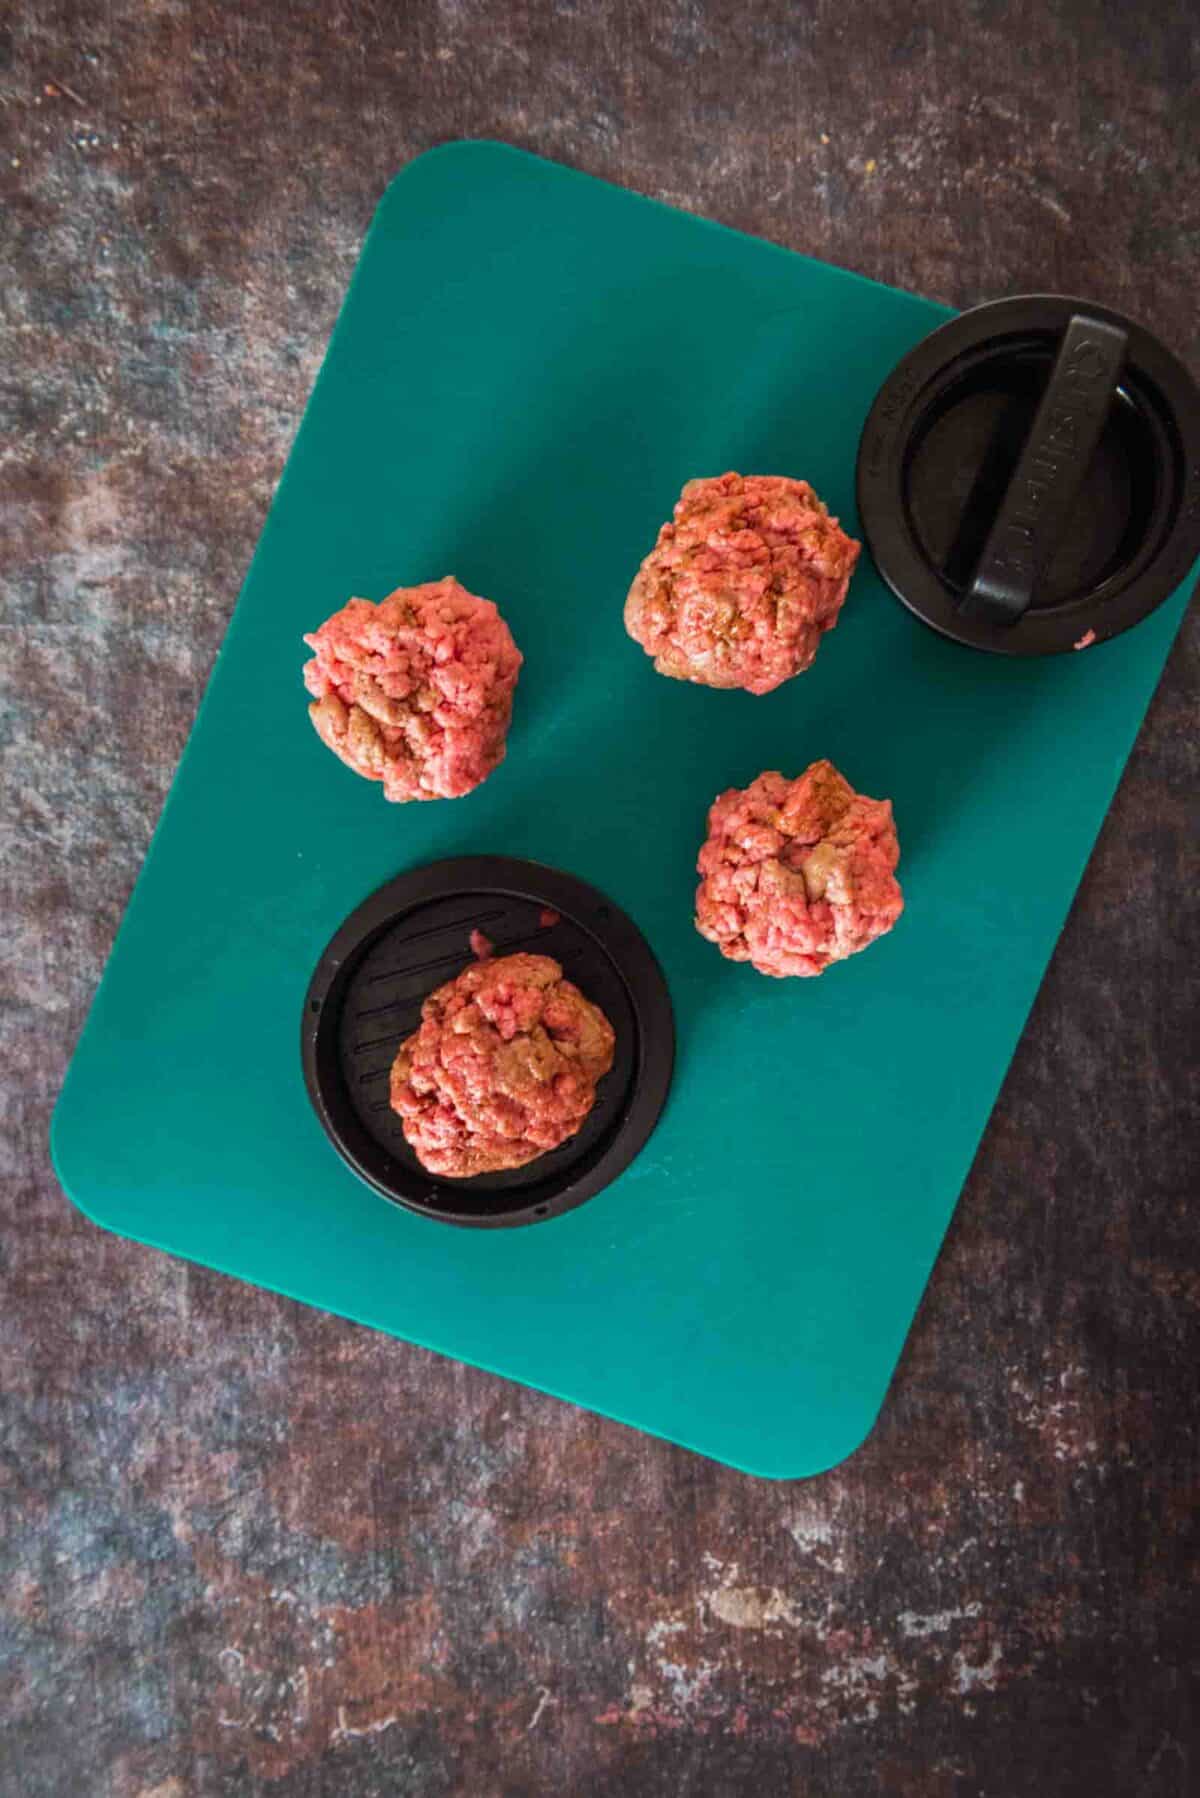 Showing ground beef being divideed into balls to form patties. 